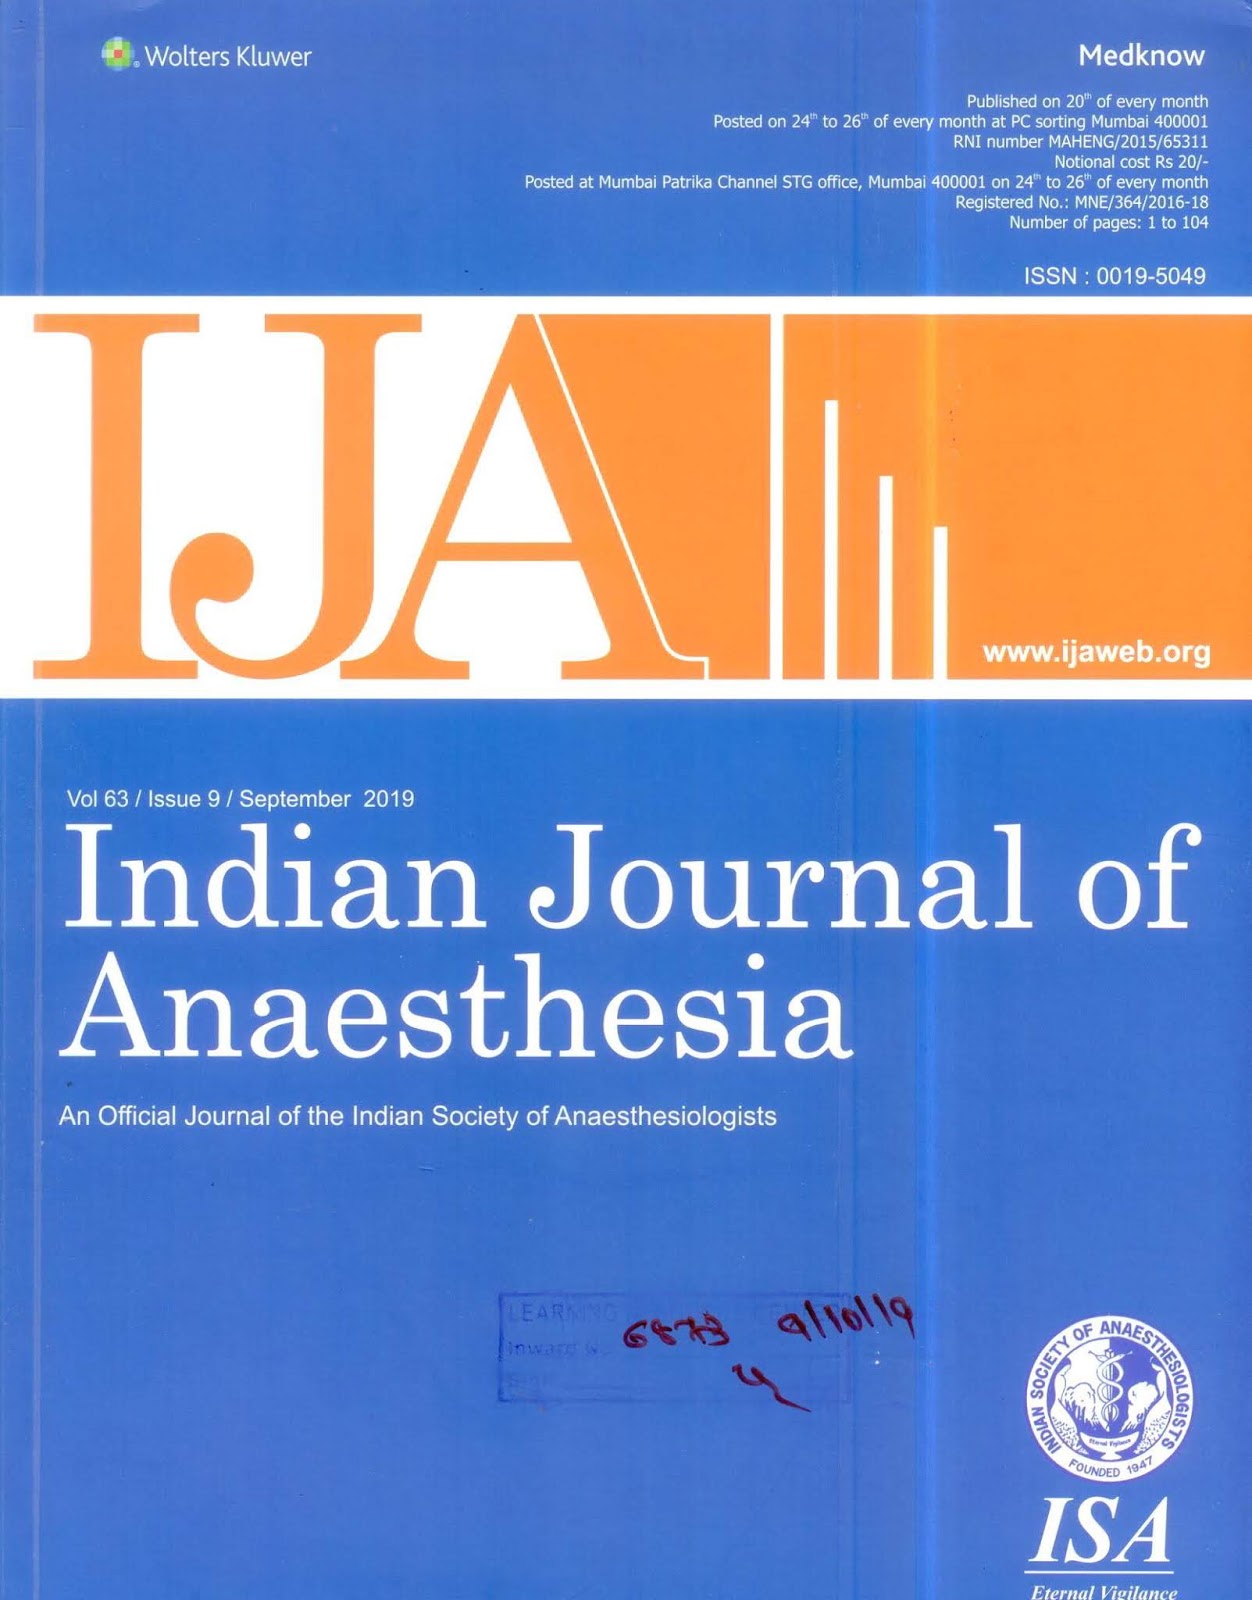 http://www.ijaweb.org/showBackIssue.asp?issn=0019-5049;year=2019;volume=63;issue=9;month=September